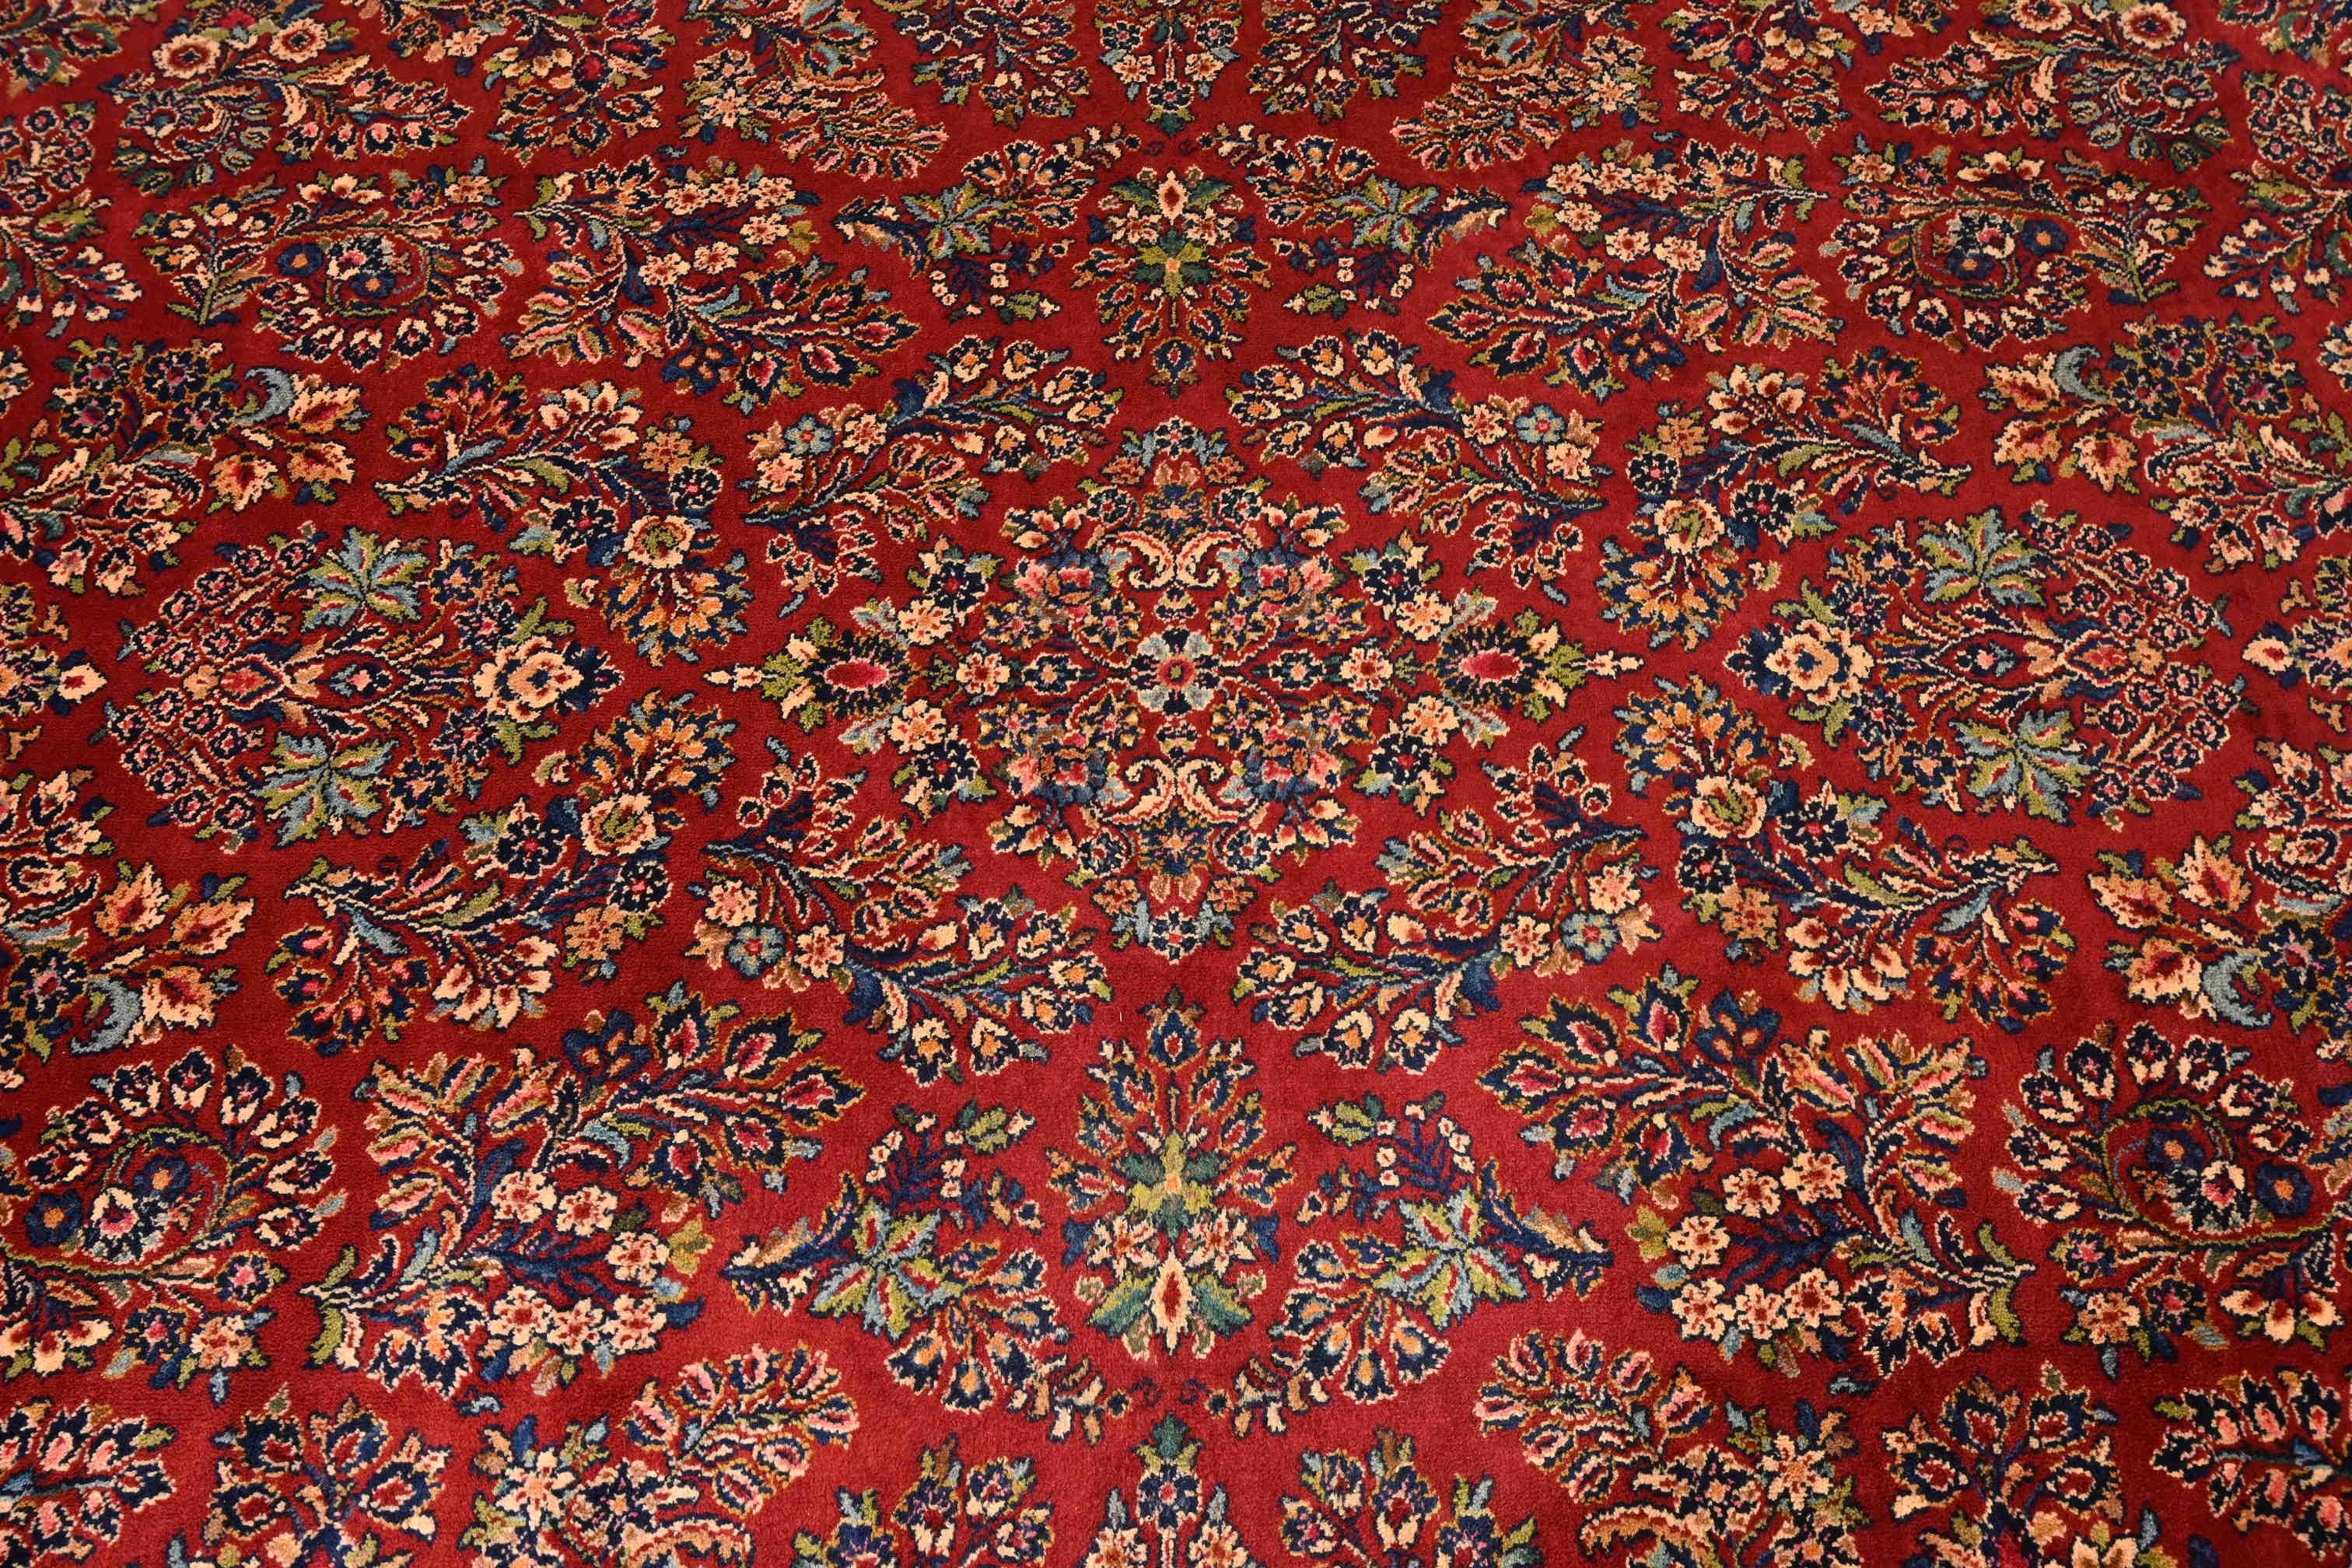 Karastan Sarouk Room Size Wool Rug, Circa 1950s In Good Condition For Sale In South Bend, IN